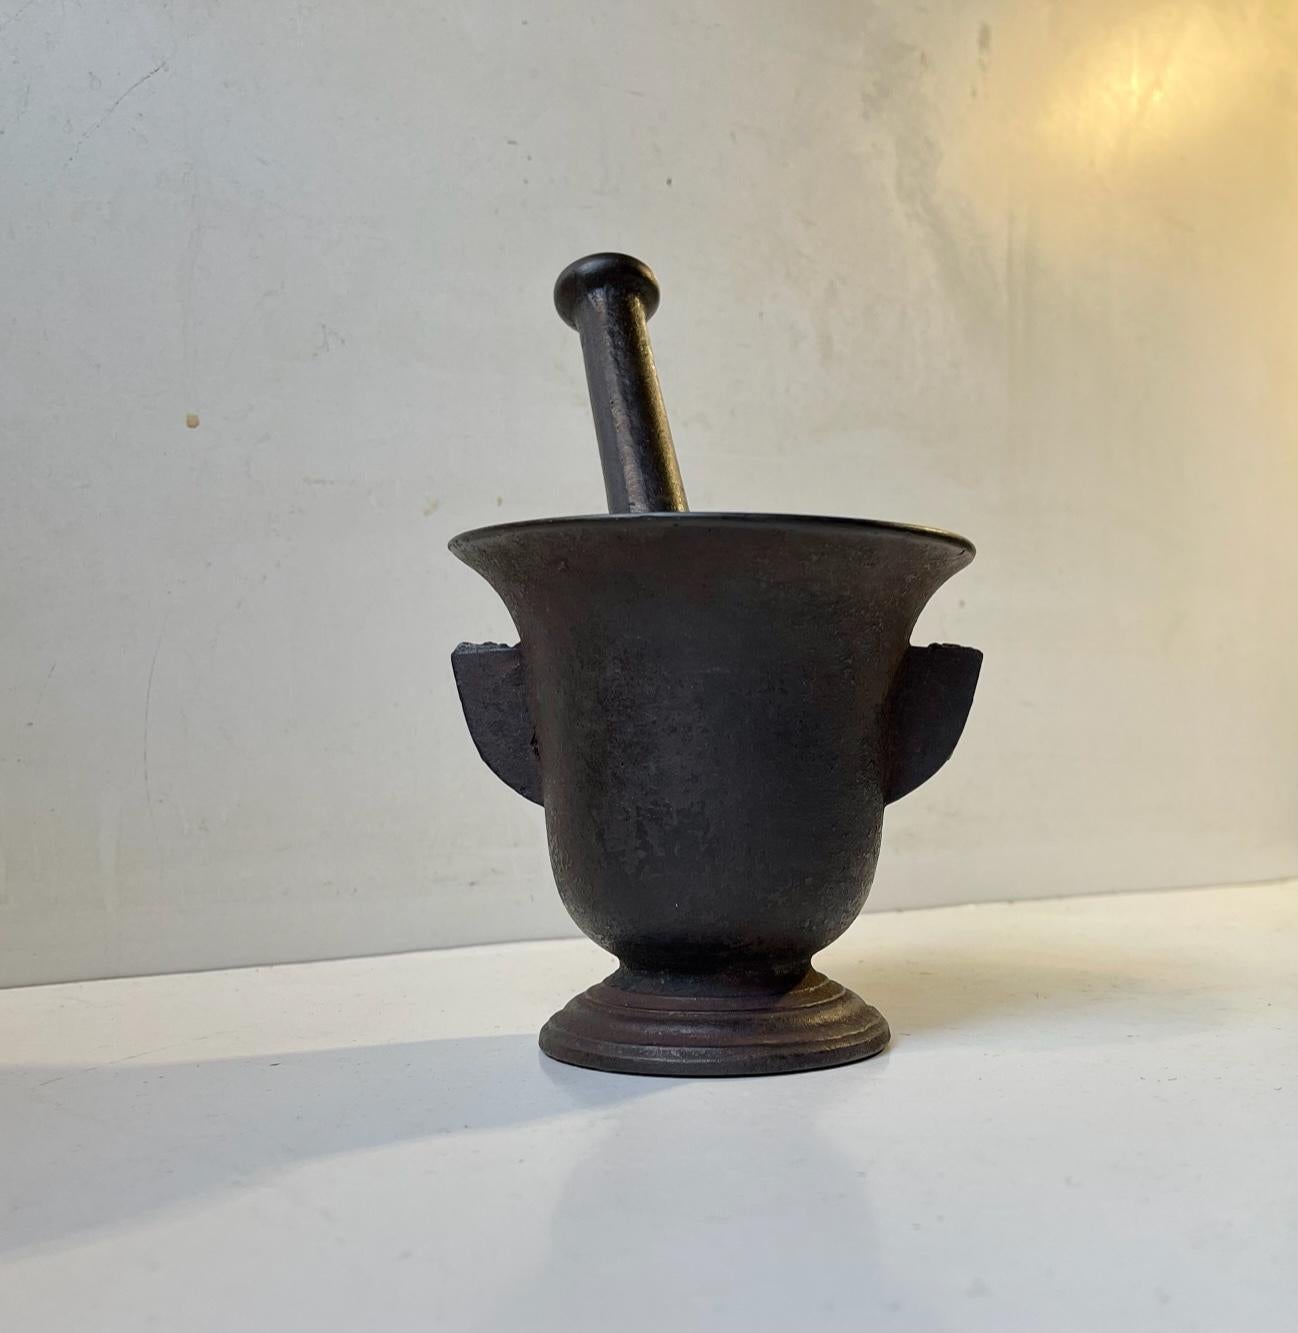 Finely proportioned, medium sized cast iron mortar and pestle. With its original finish and excellent patina. Authentic, nice and heavy. European, 19th century. Number matching mortar and pestle. Measurements: mortar: 11.5 x 10.5 cm, pestle: 18 cm